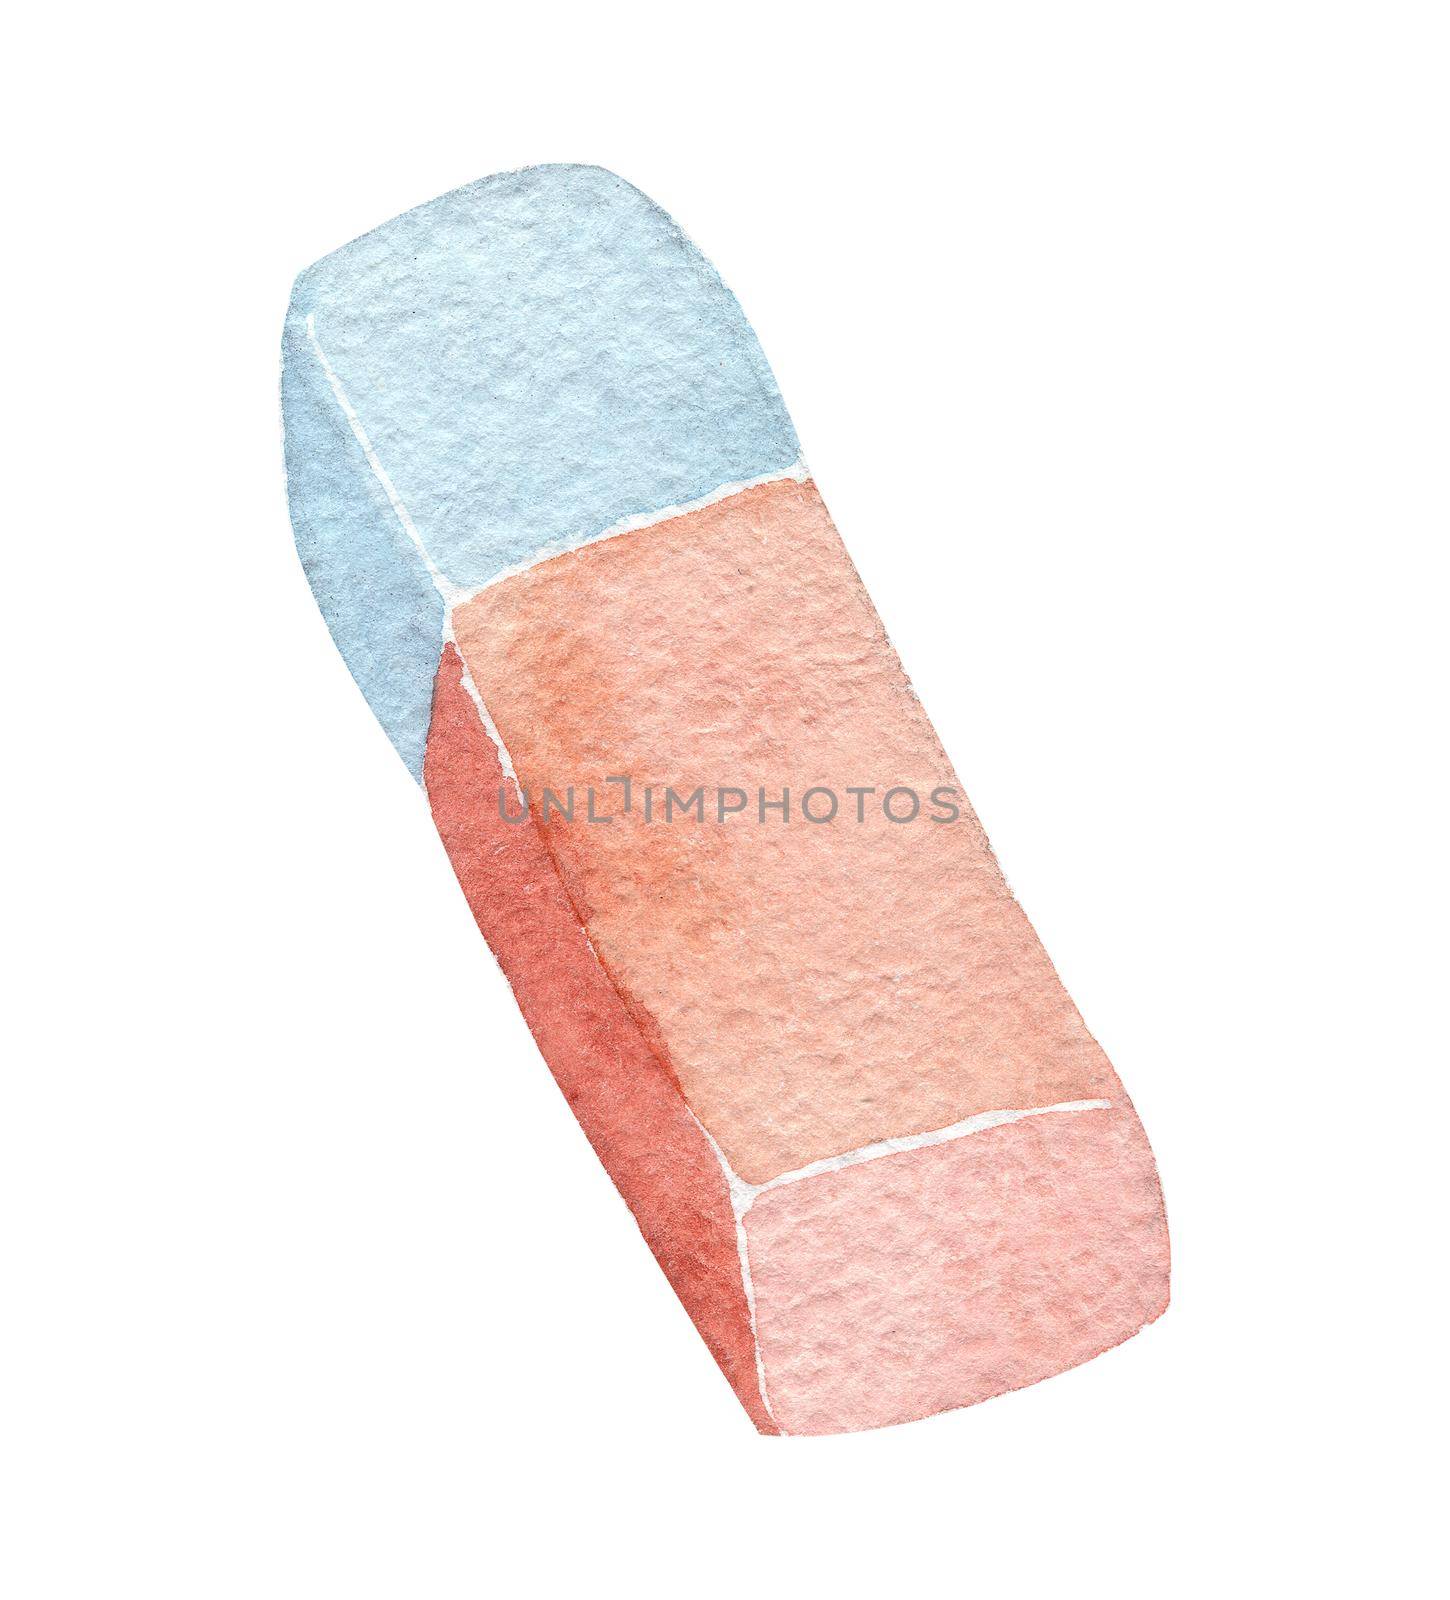 watercolor blue brown eraser stationery isolated on white background